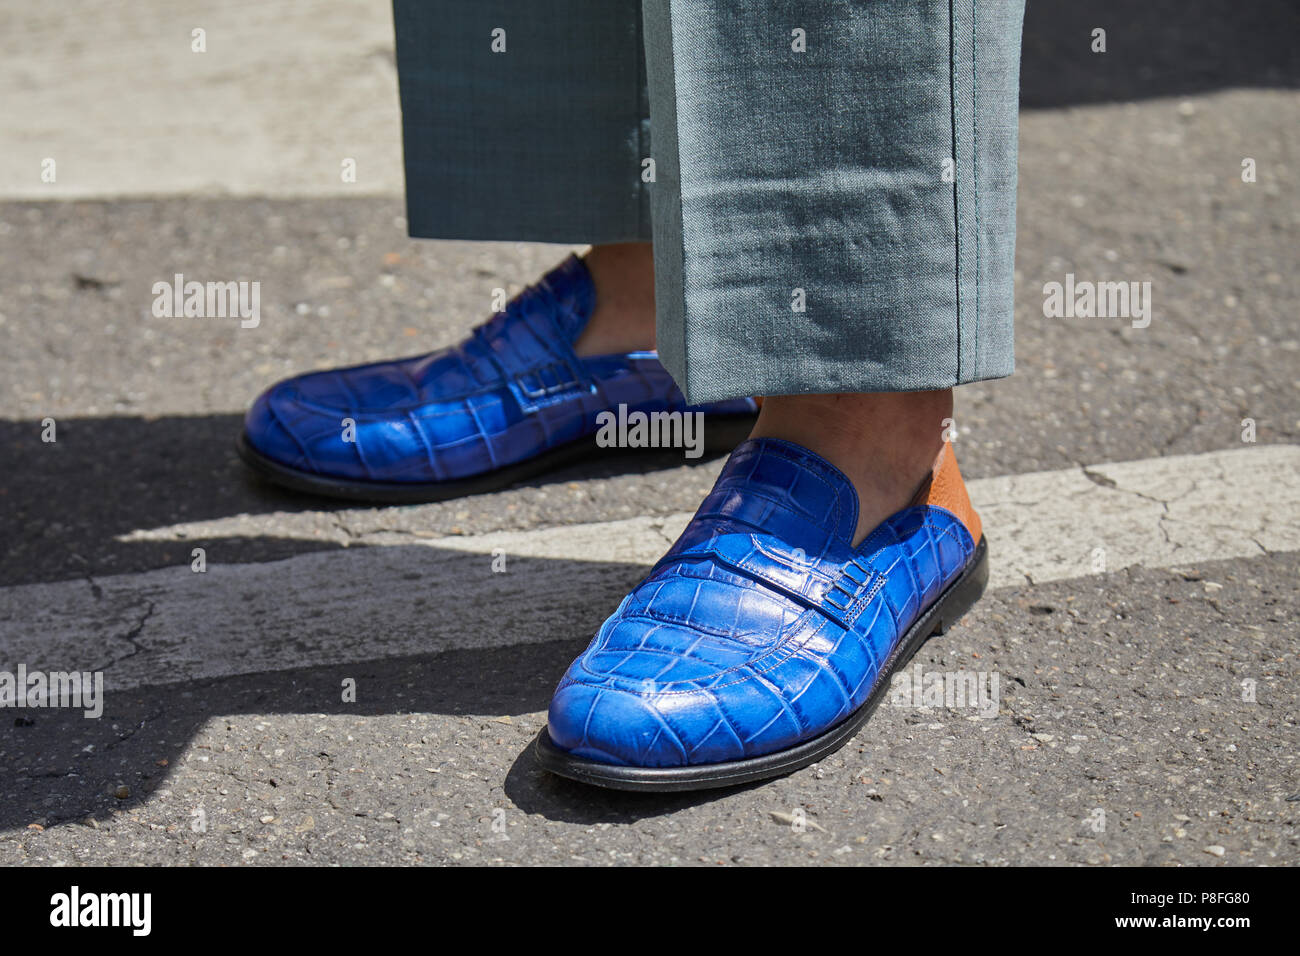 Crocodile Leather Shoes High Resolution Stock Photography and Images - Alamy